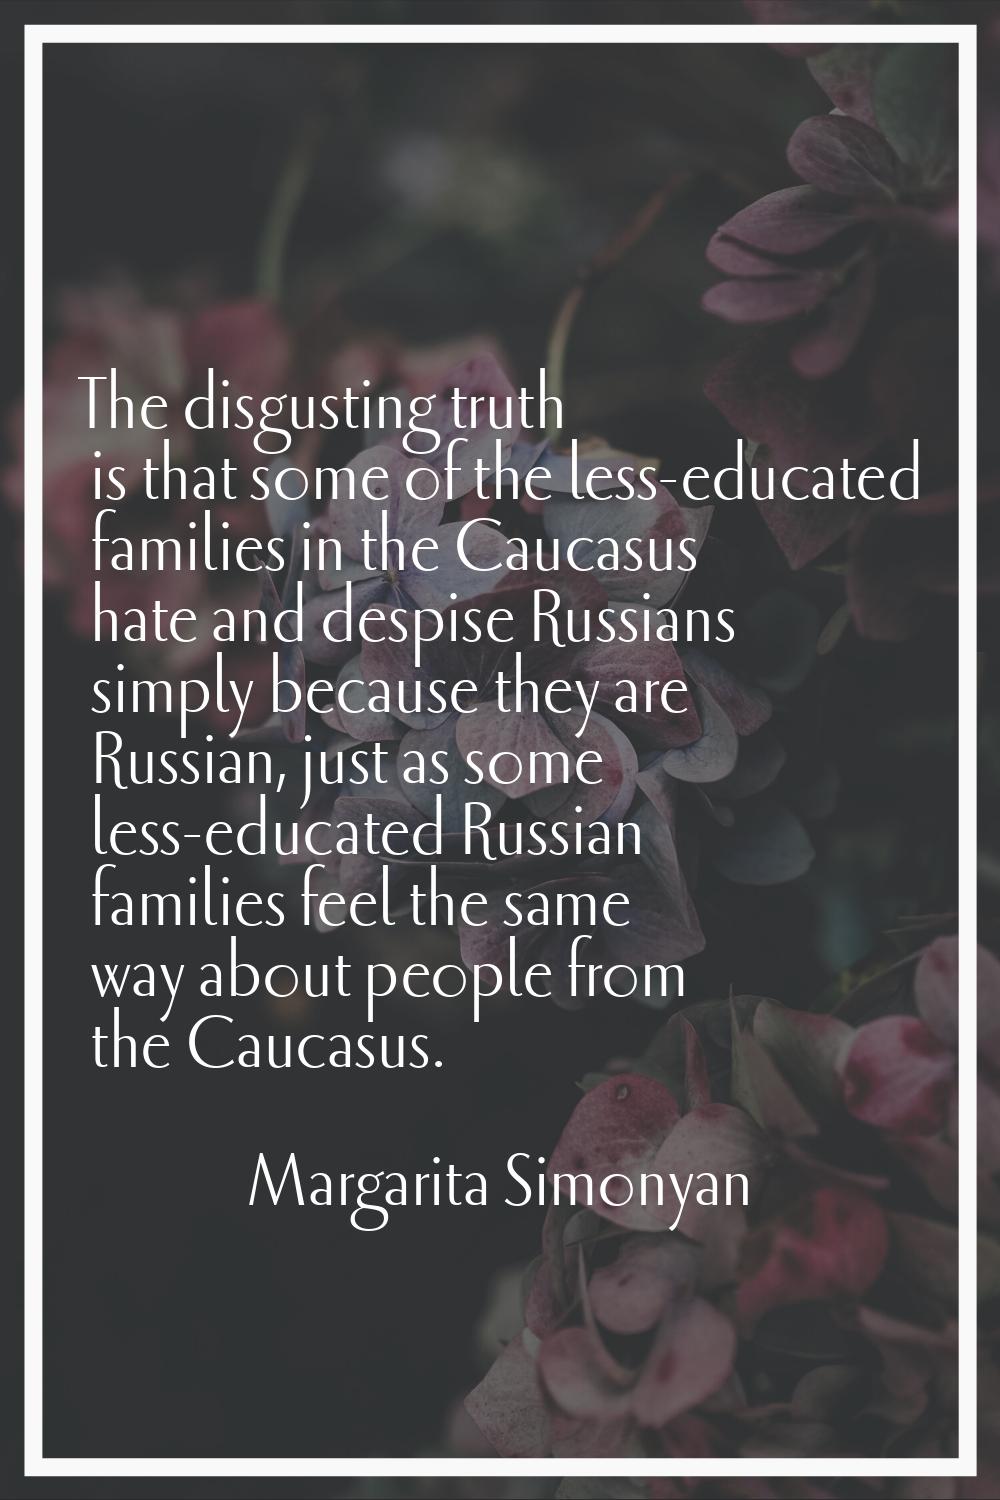 The disgusting truth is that some of the less-educated families in the Caucasus hate and despise Ru